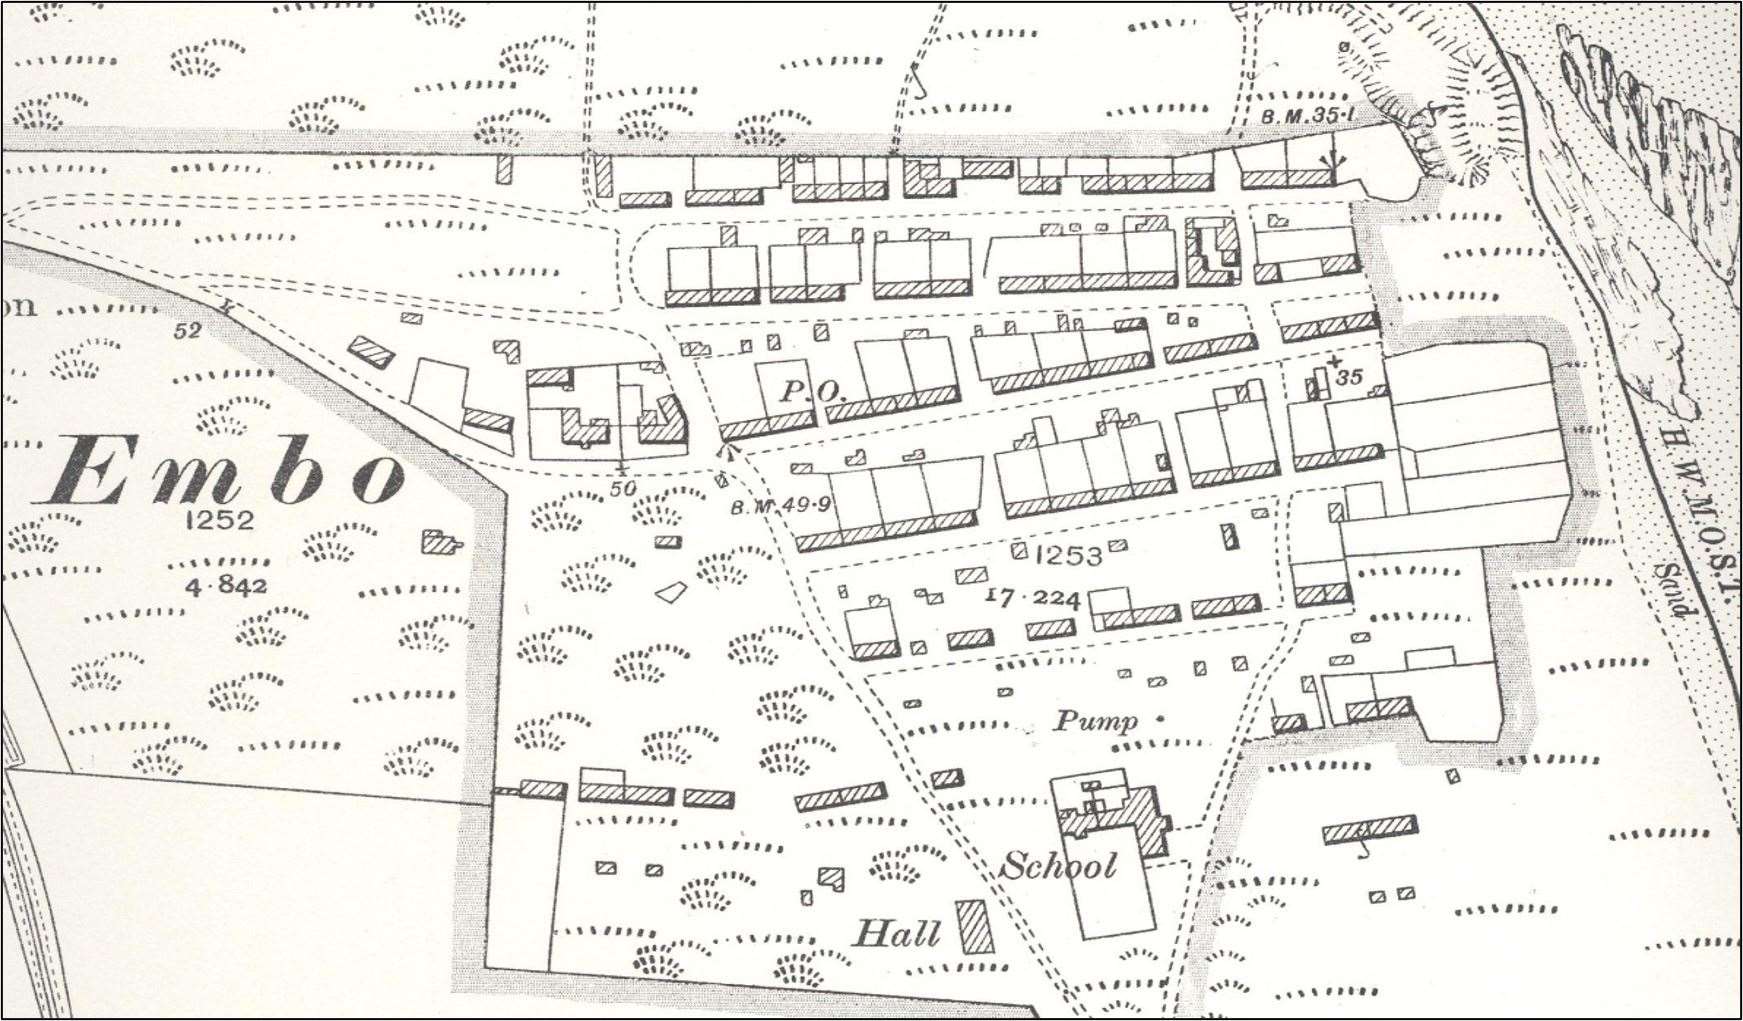 This archive map shows the location of the school.